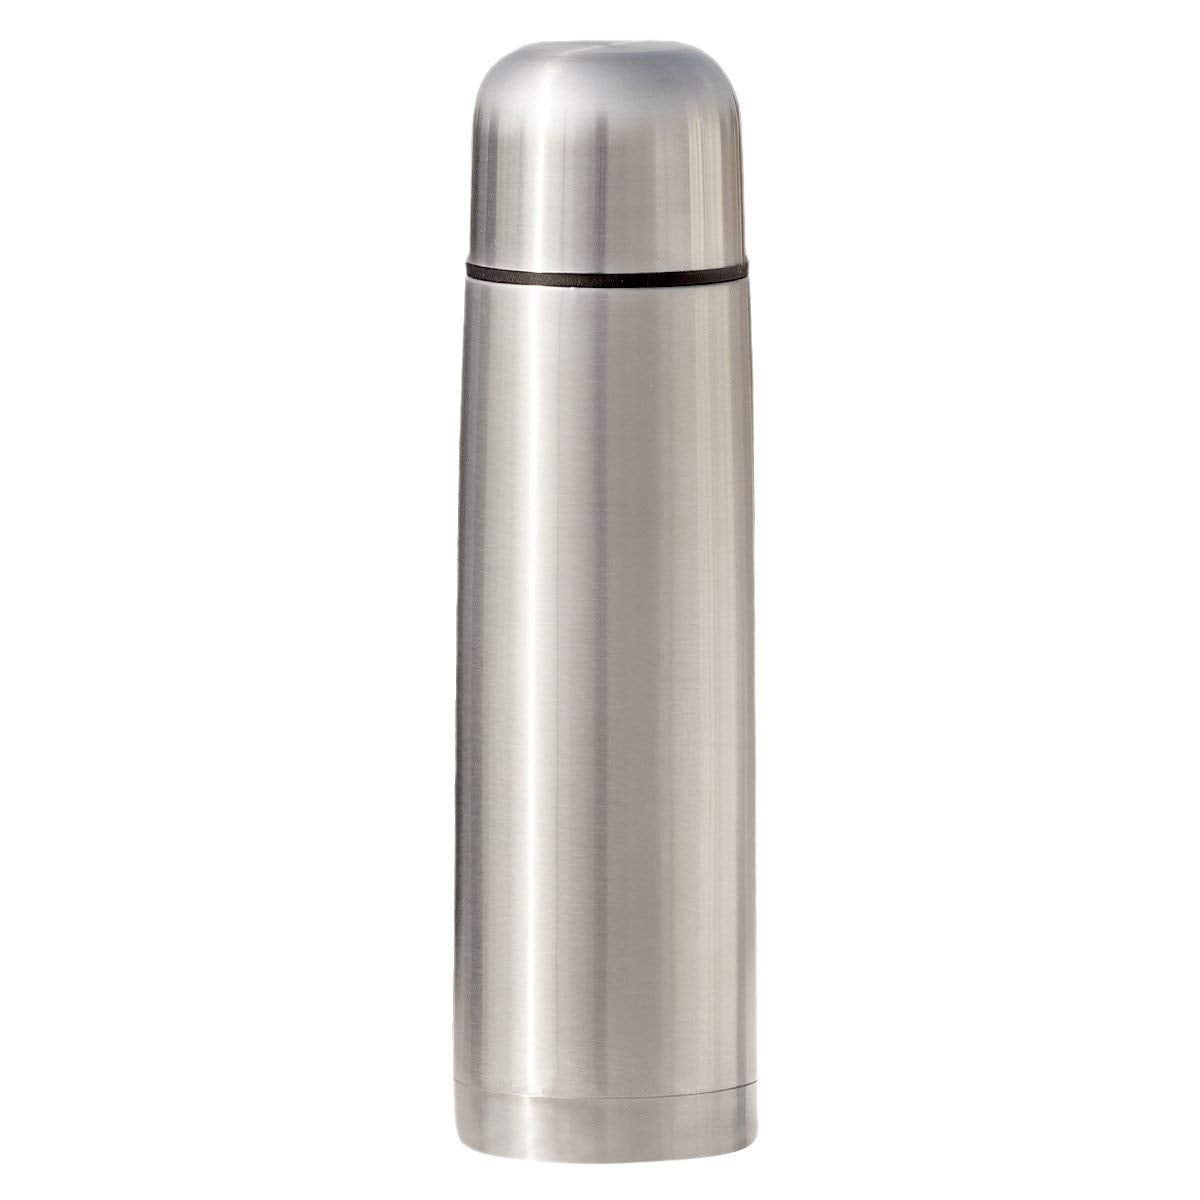 CAMPING HOT COLD TEA COFFEE VACUUM STEEL TRAVEL 500ml NEW THERMOS FLASK CAR 